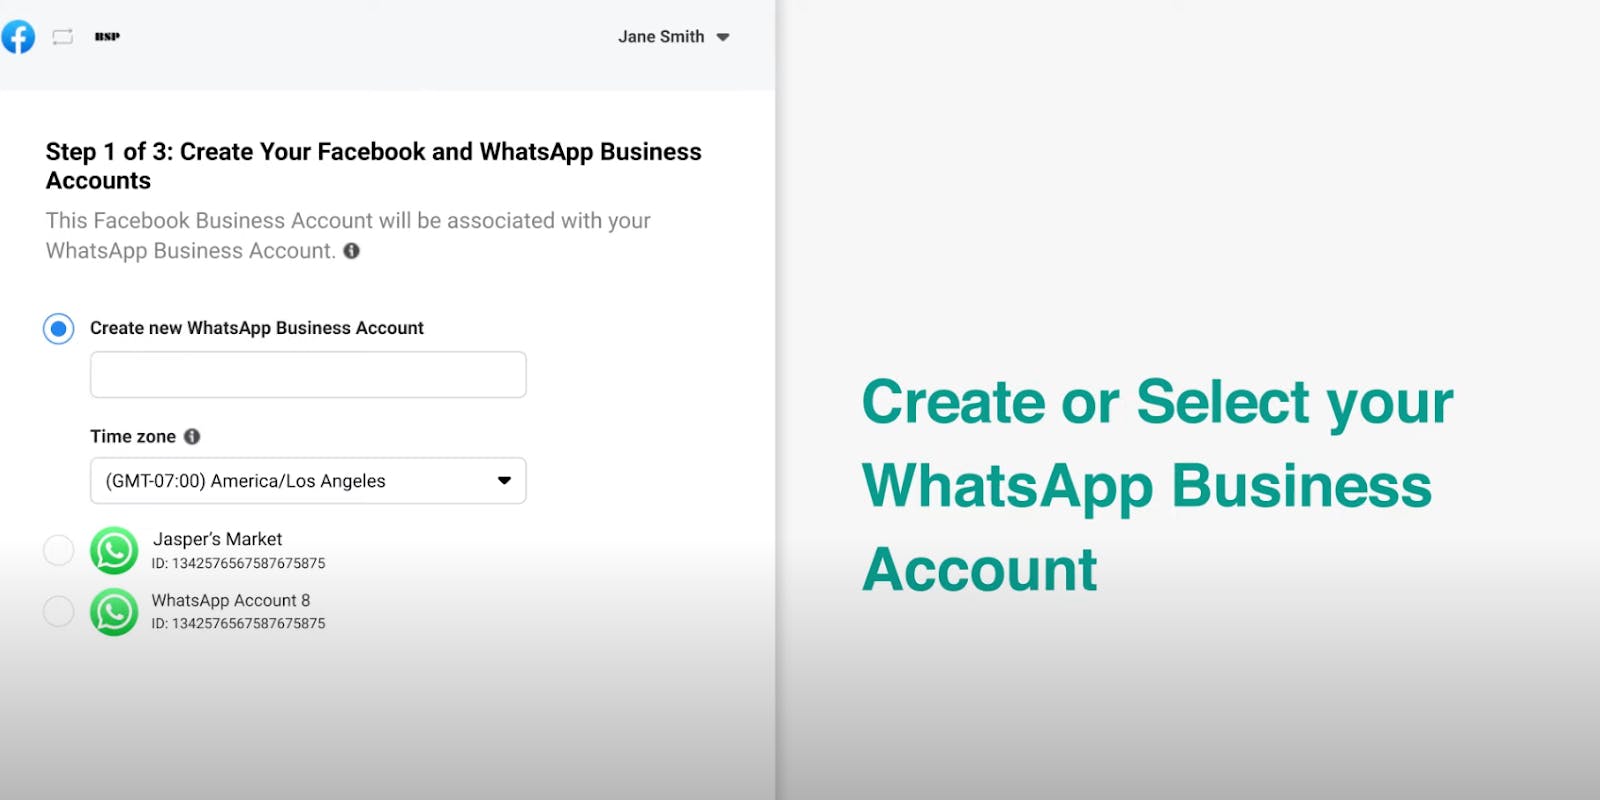 create or select your business account